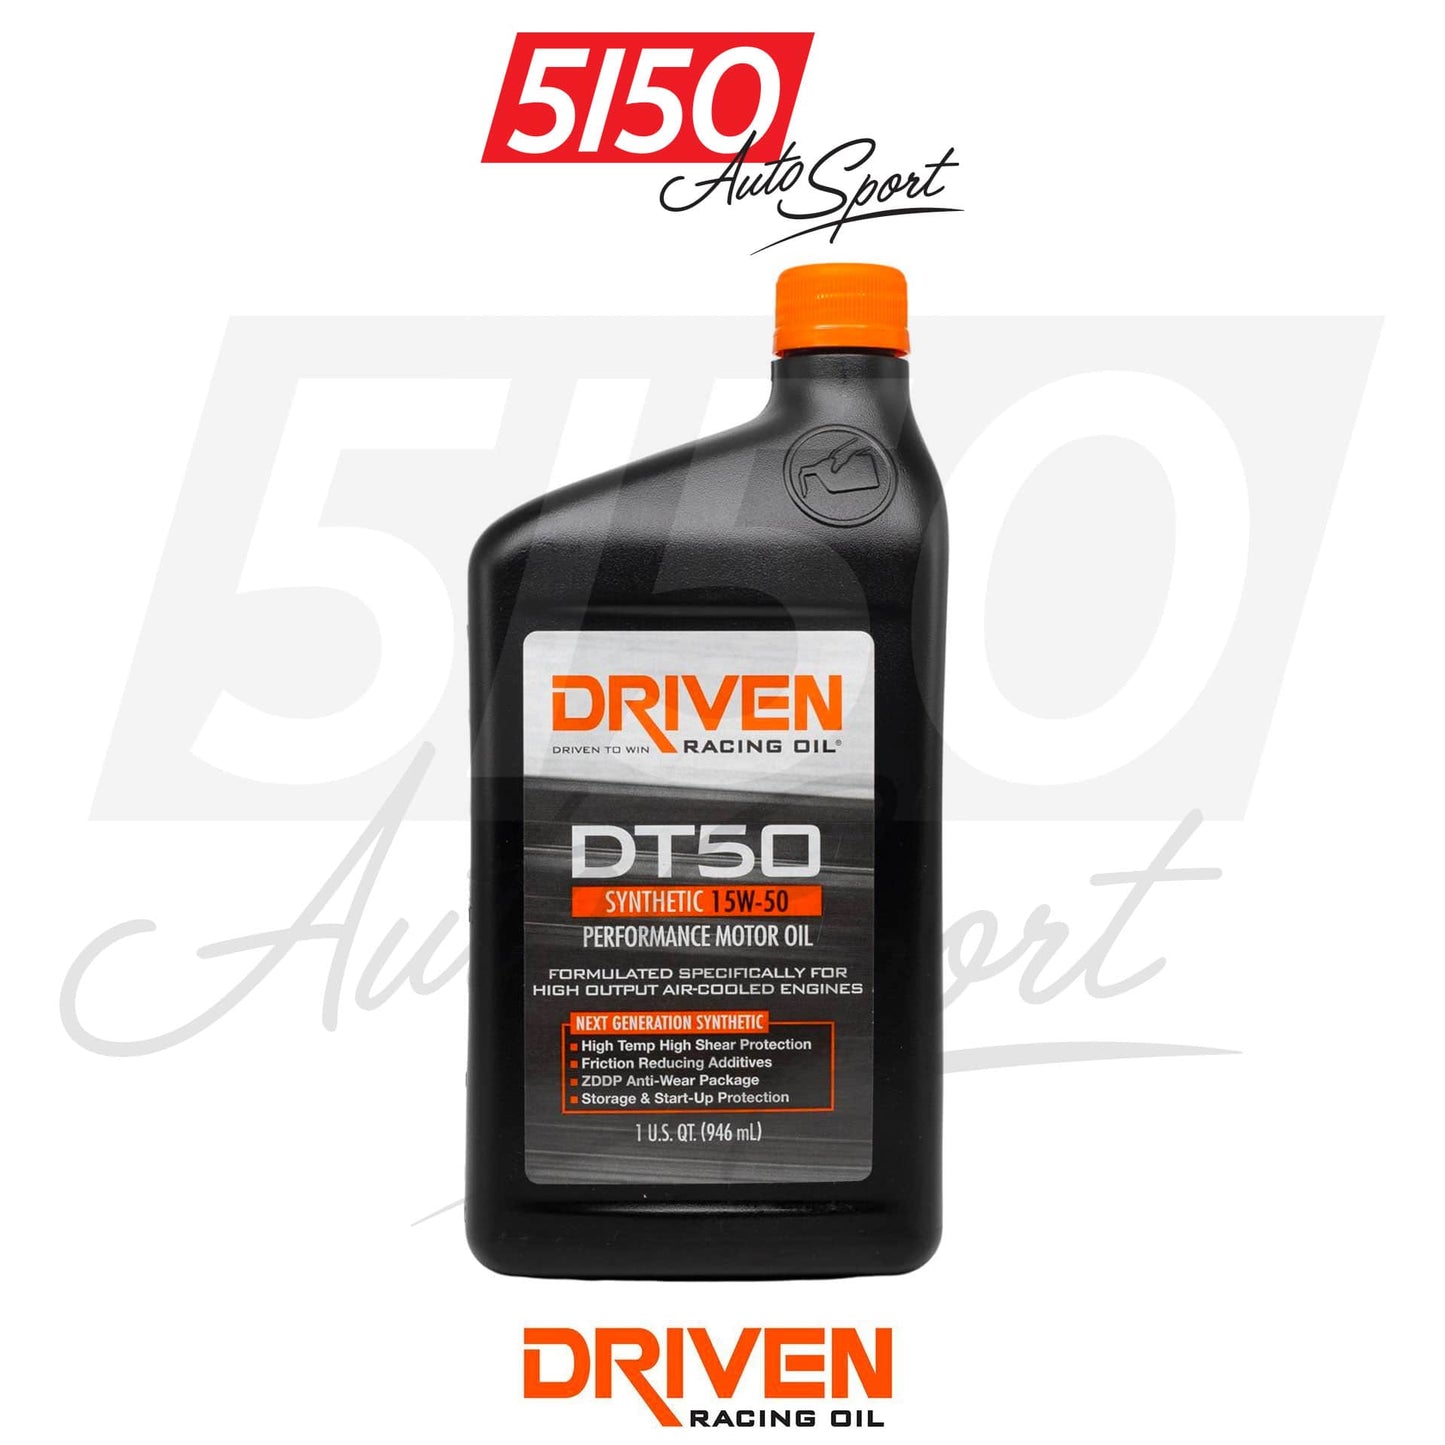 Driven Racing Oil DT50 15W-50 Synthetic Street Performance Oil